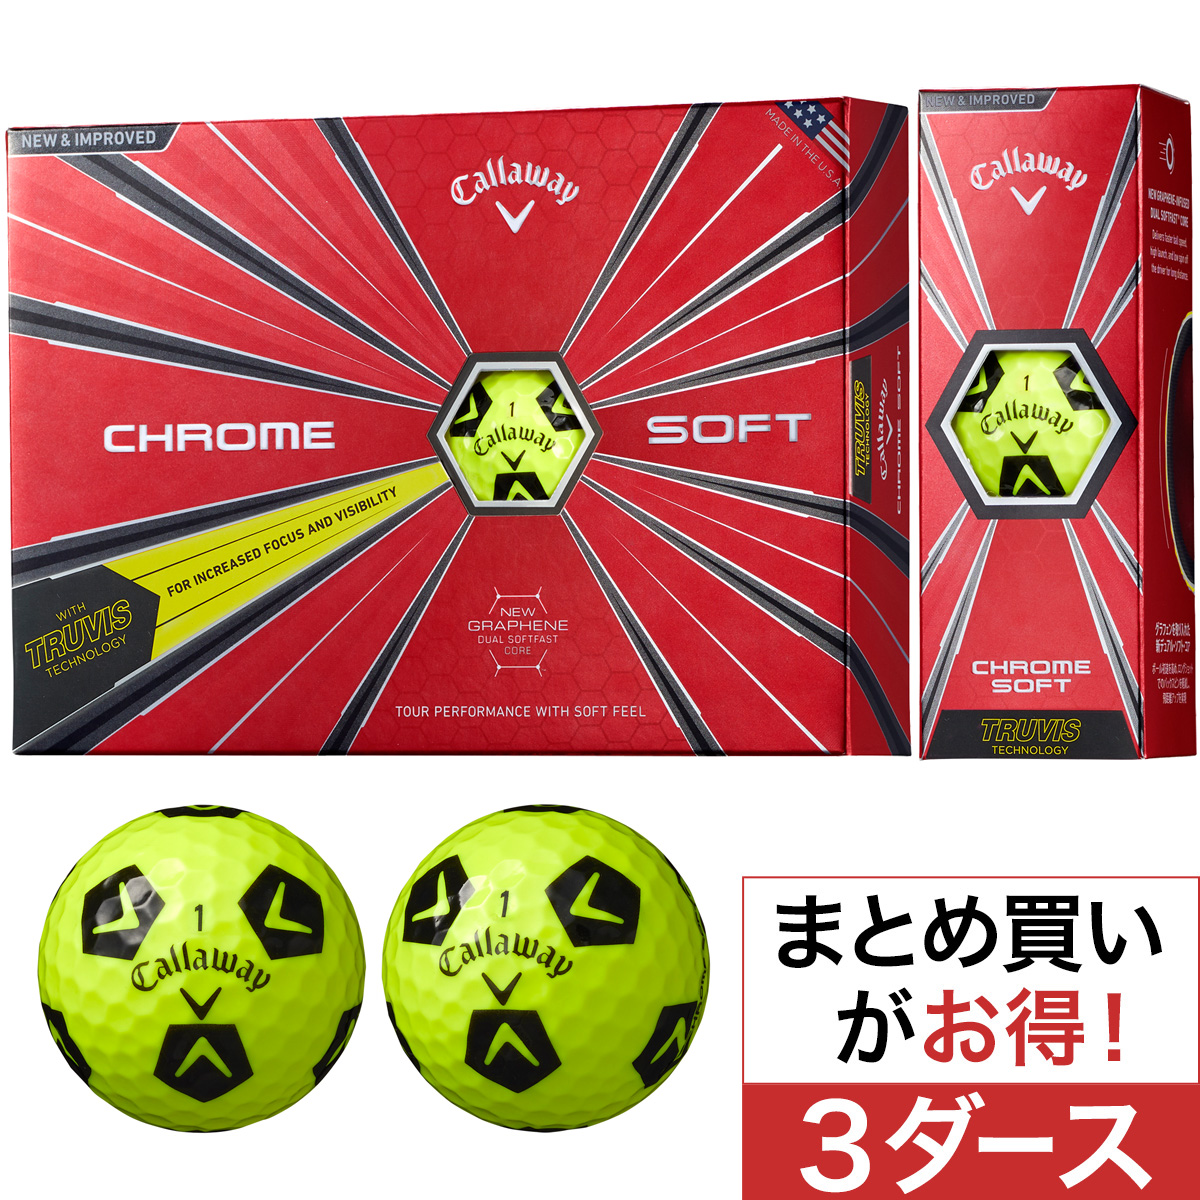  CHROME SOFT TRUVIS ボール 3ダースセット 